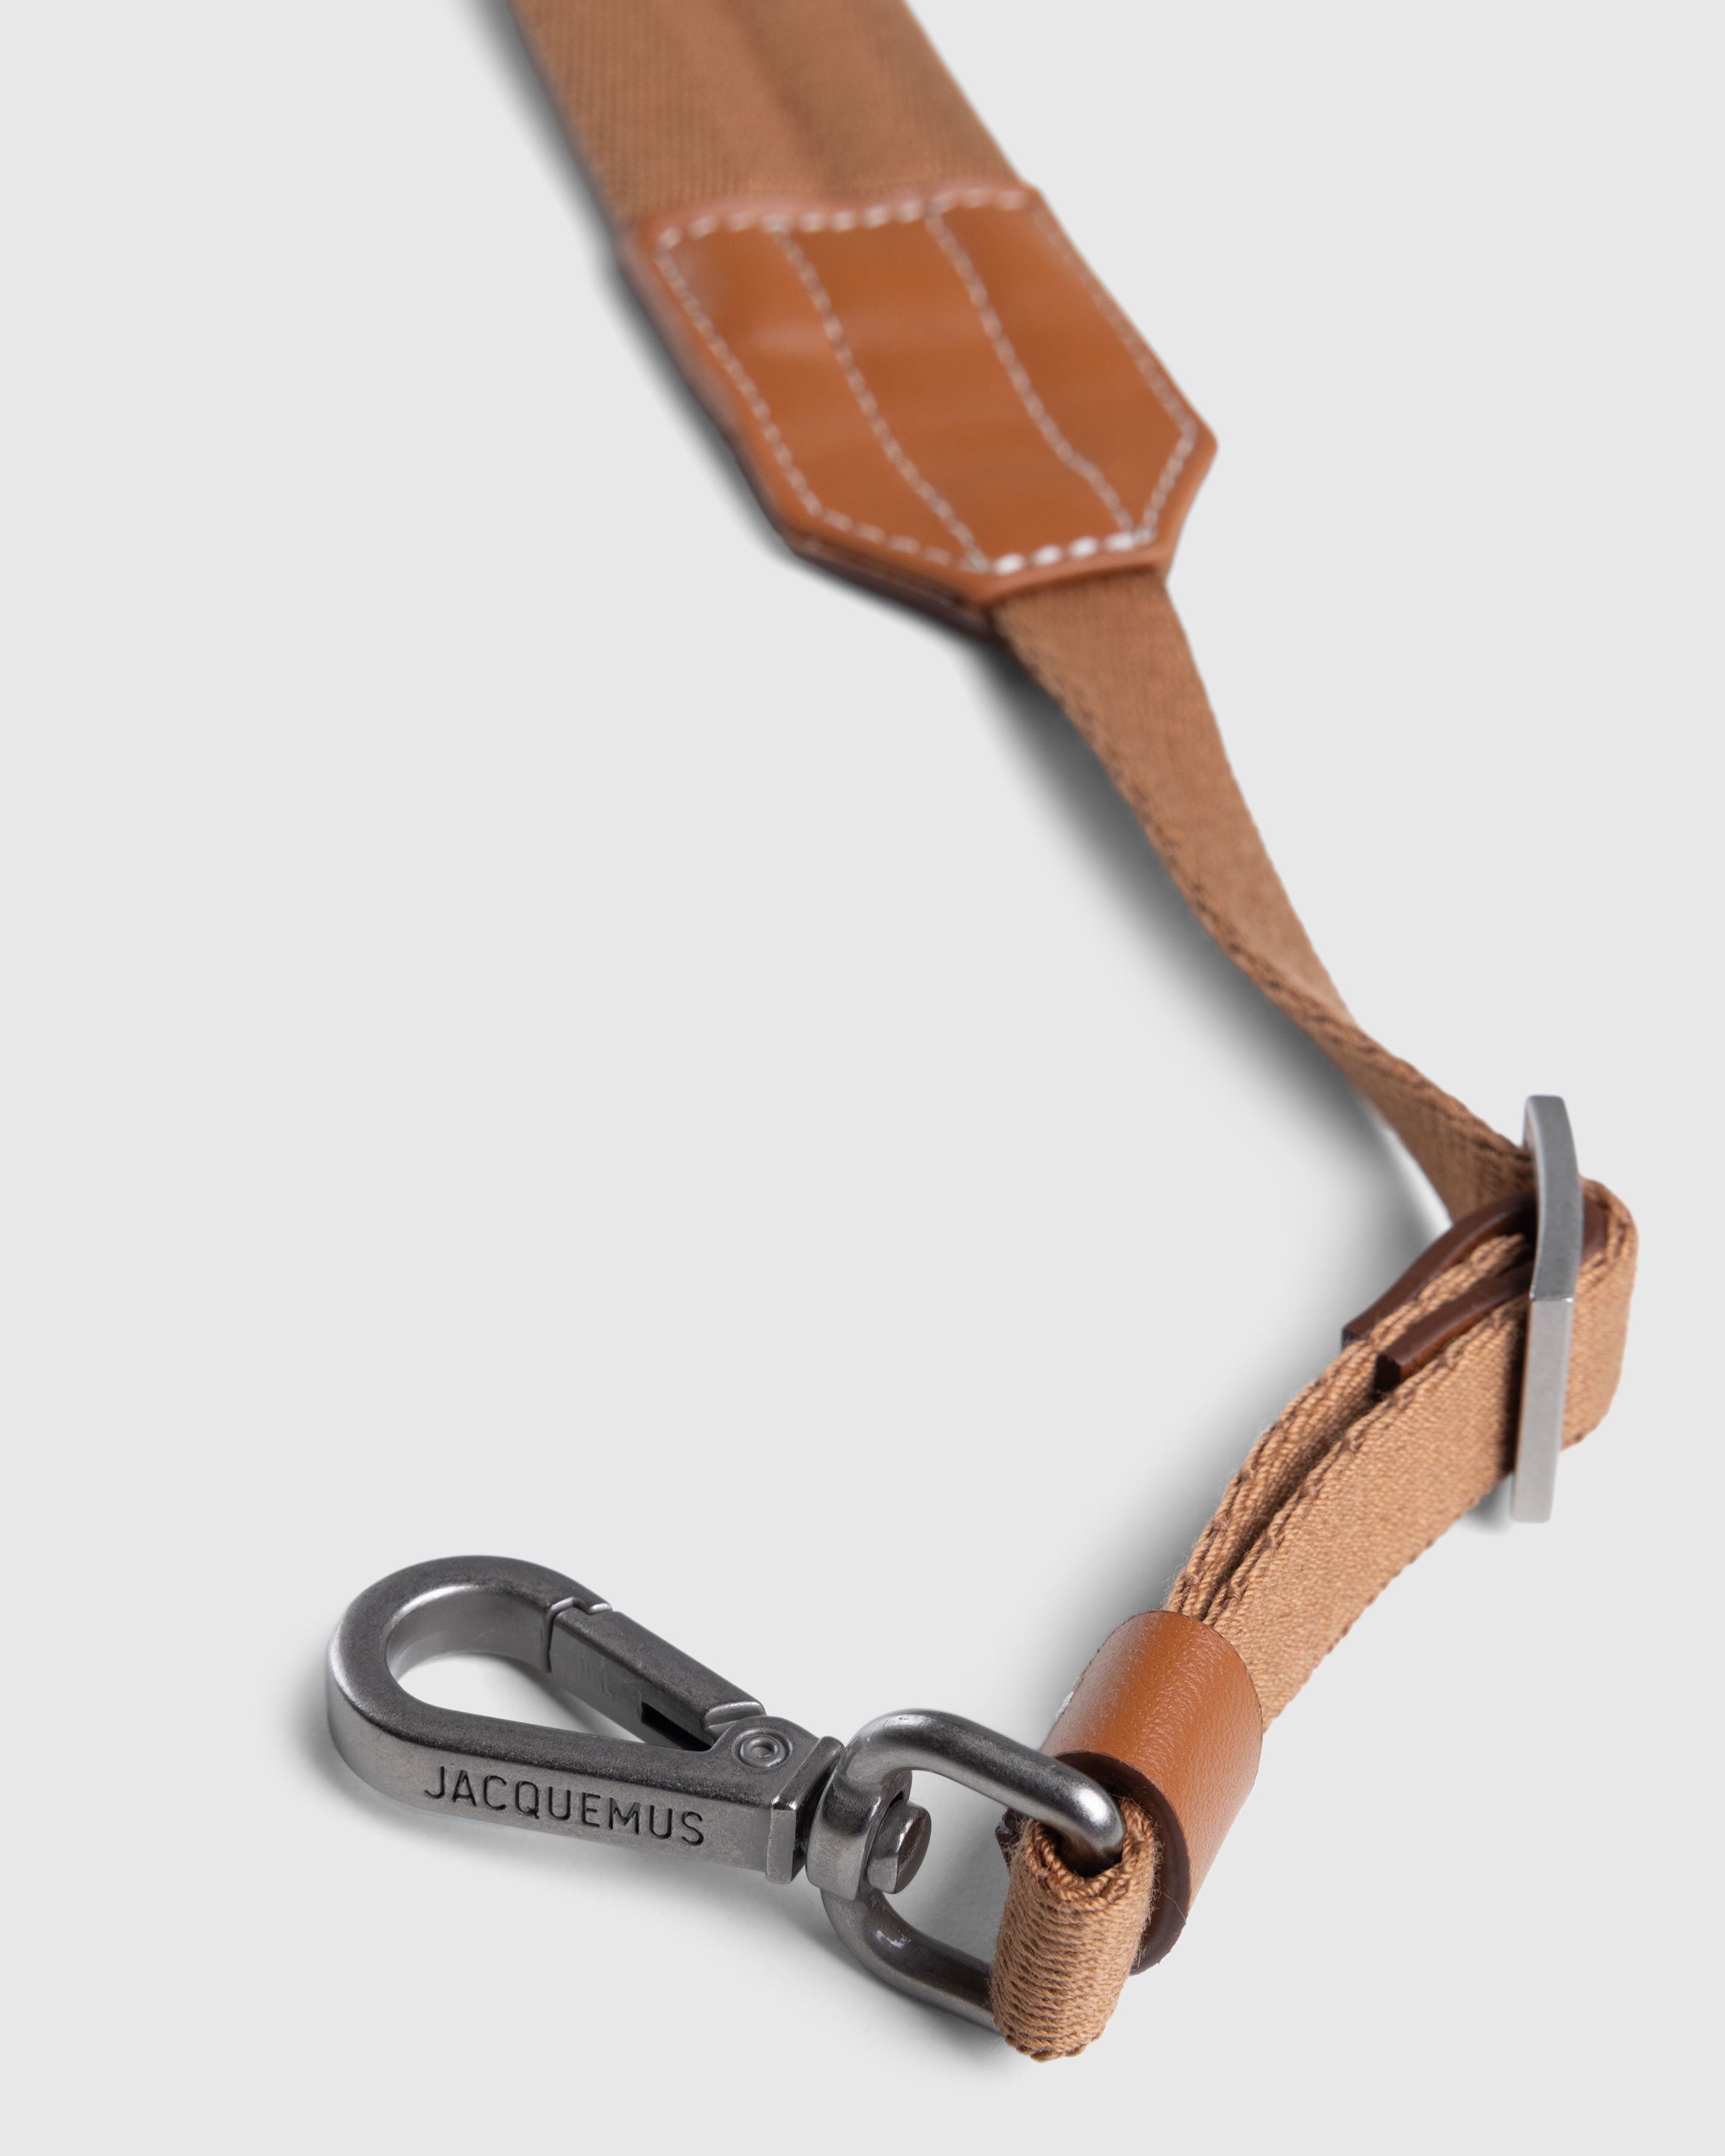 JACQUEMUS - LE CHIQUITO HOMME - Accessories - Brown - Image 4